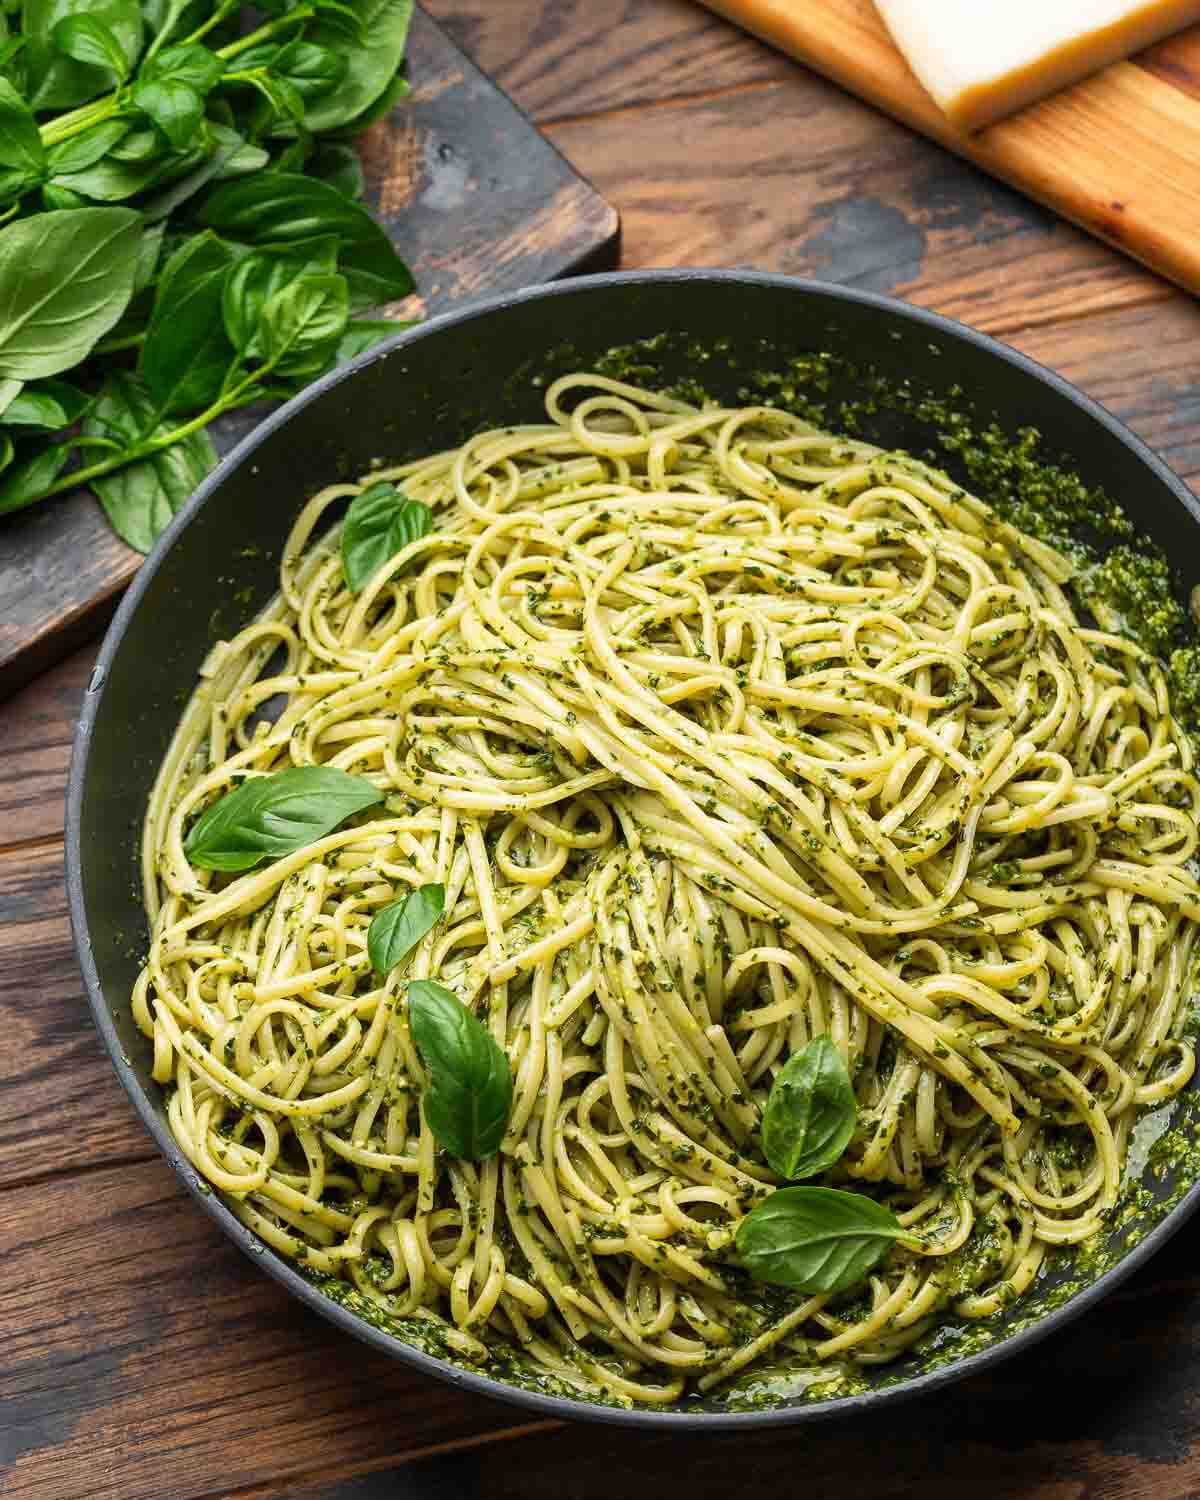 Large black pan with pasta with pesto Genovese along with basil and cheese in the background.